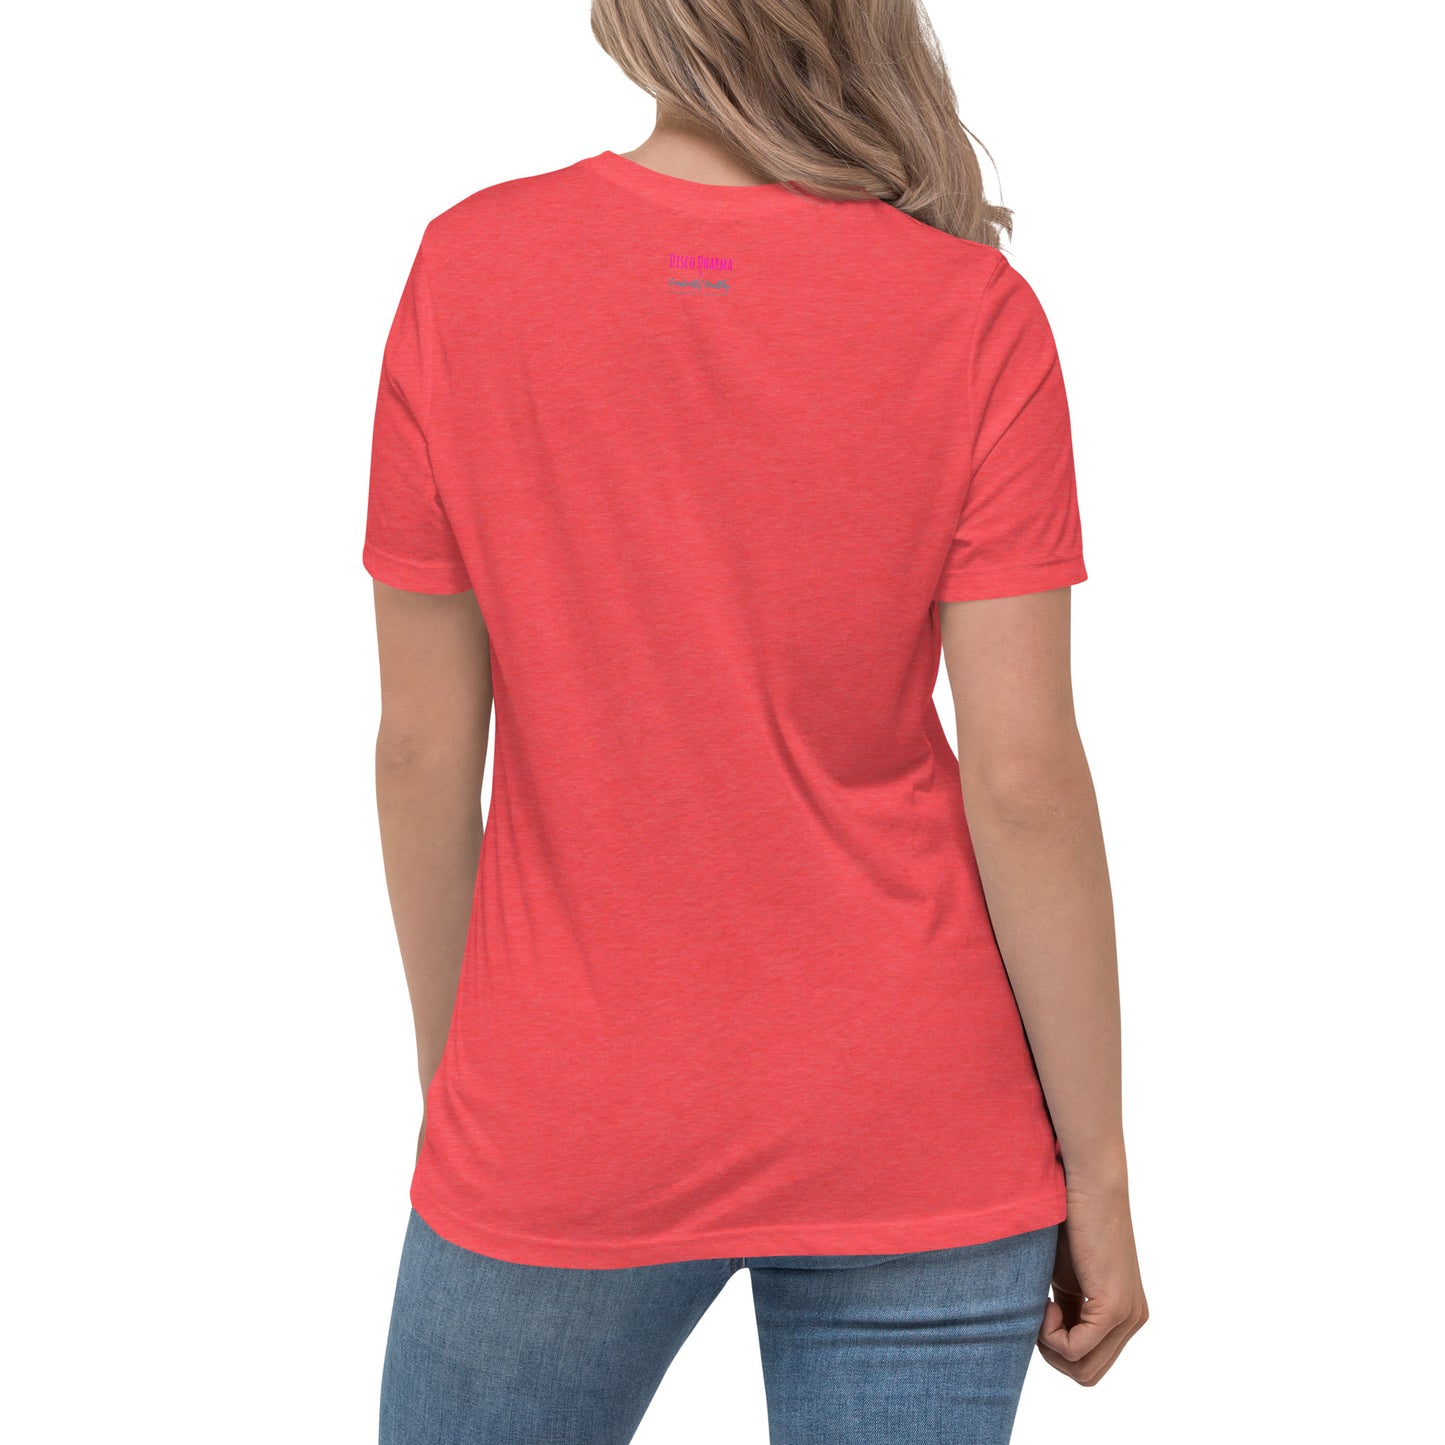 CH Therapy Women's Relaxed T-Shirt